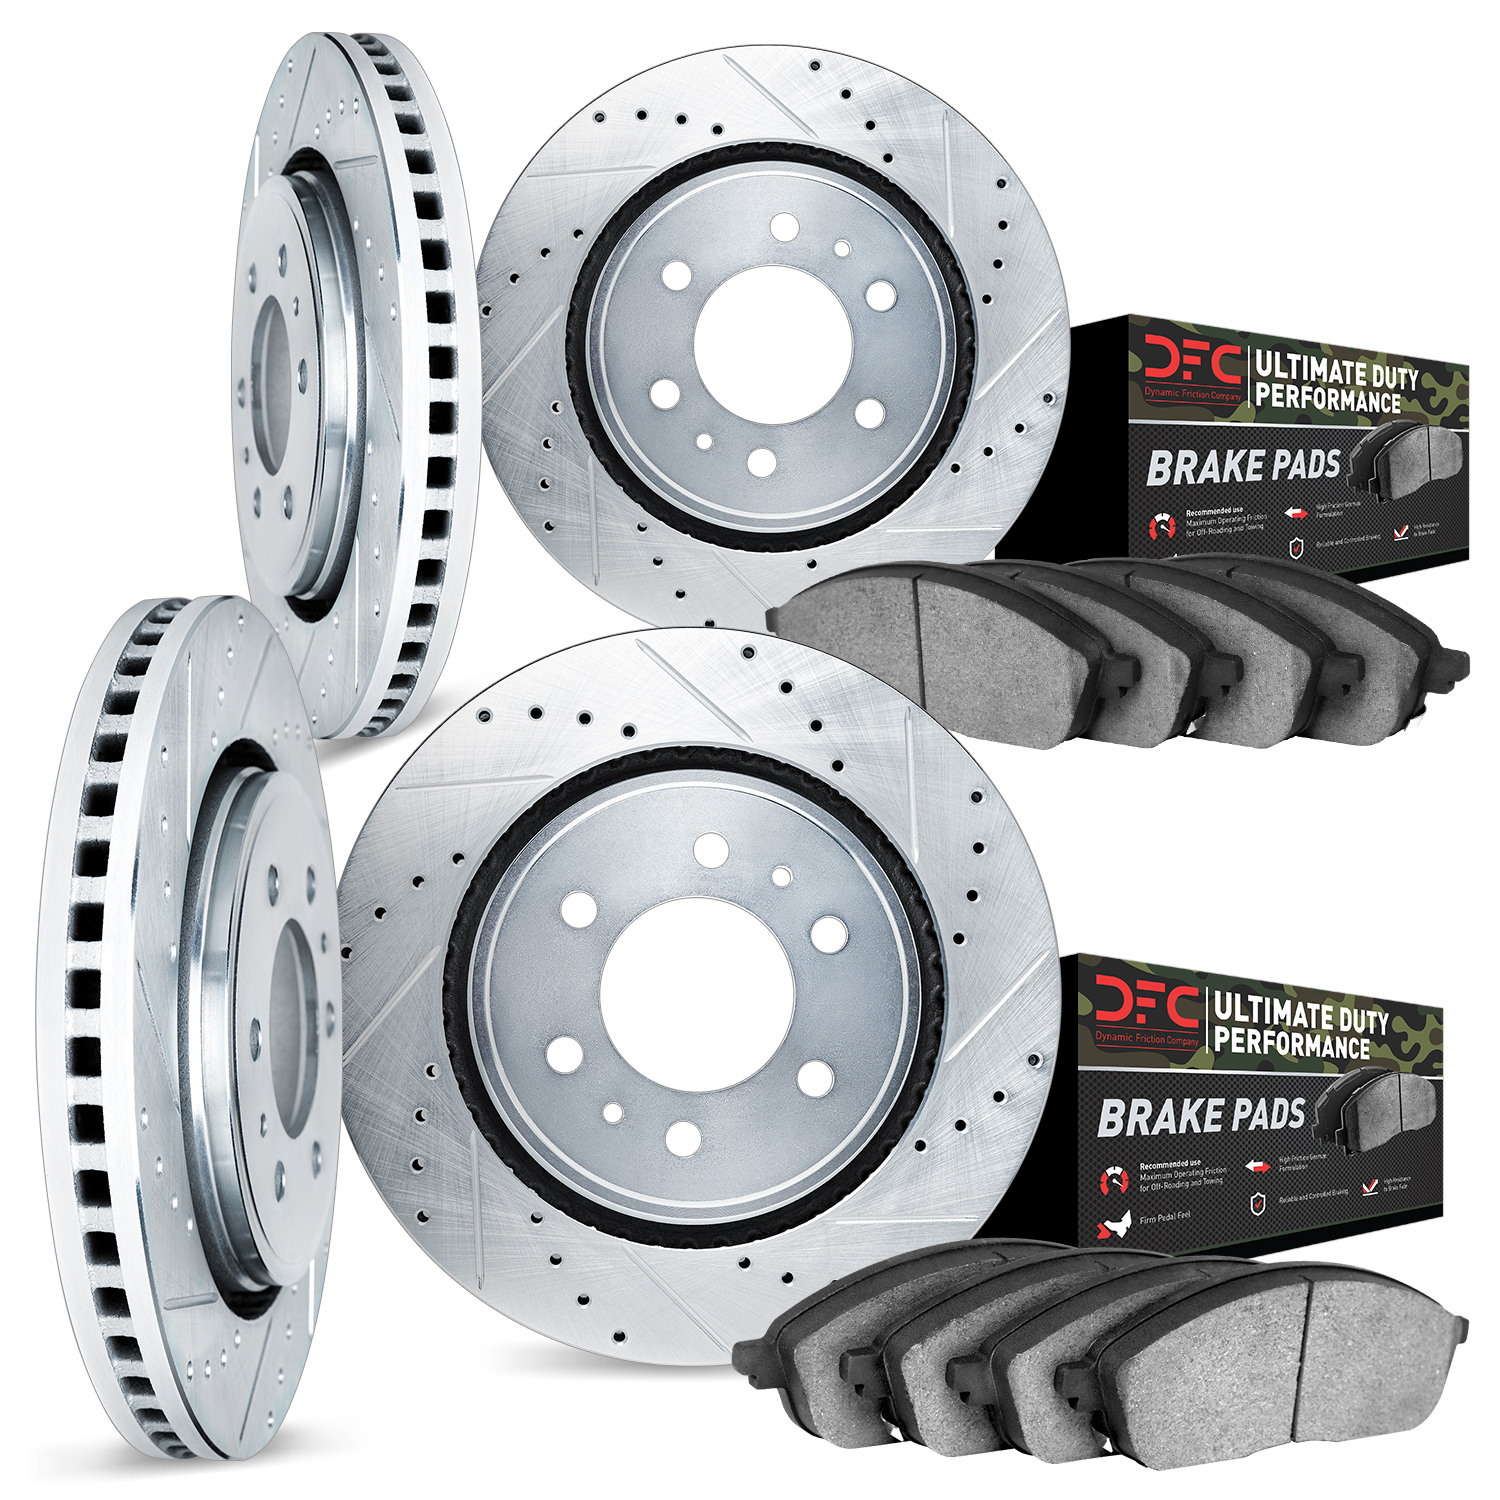 7404-92002 Drilled/Slotted Brake Rotors with Ultimate-Duty Brake Pads Kit [Silver], 2008-2014 Mitsubishi, Position: Front and Re